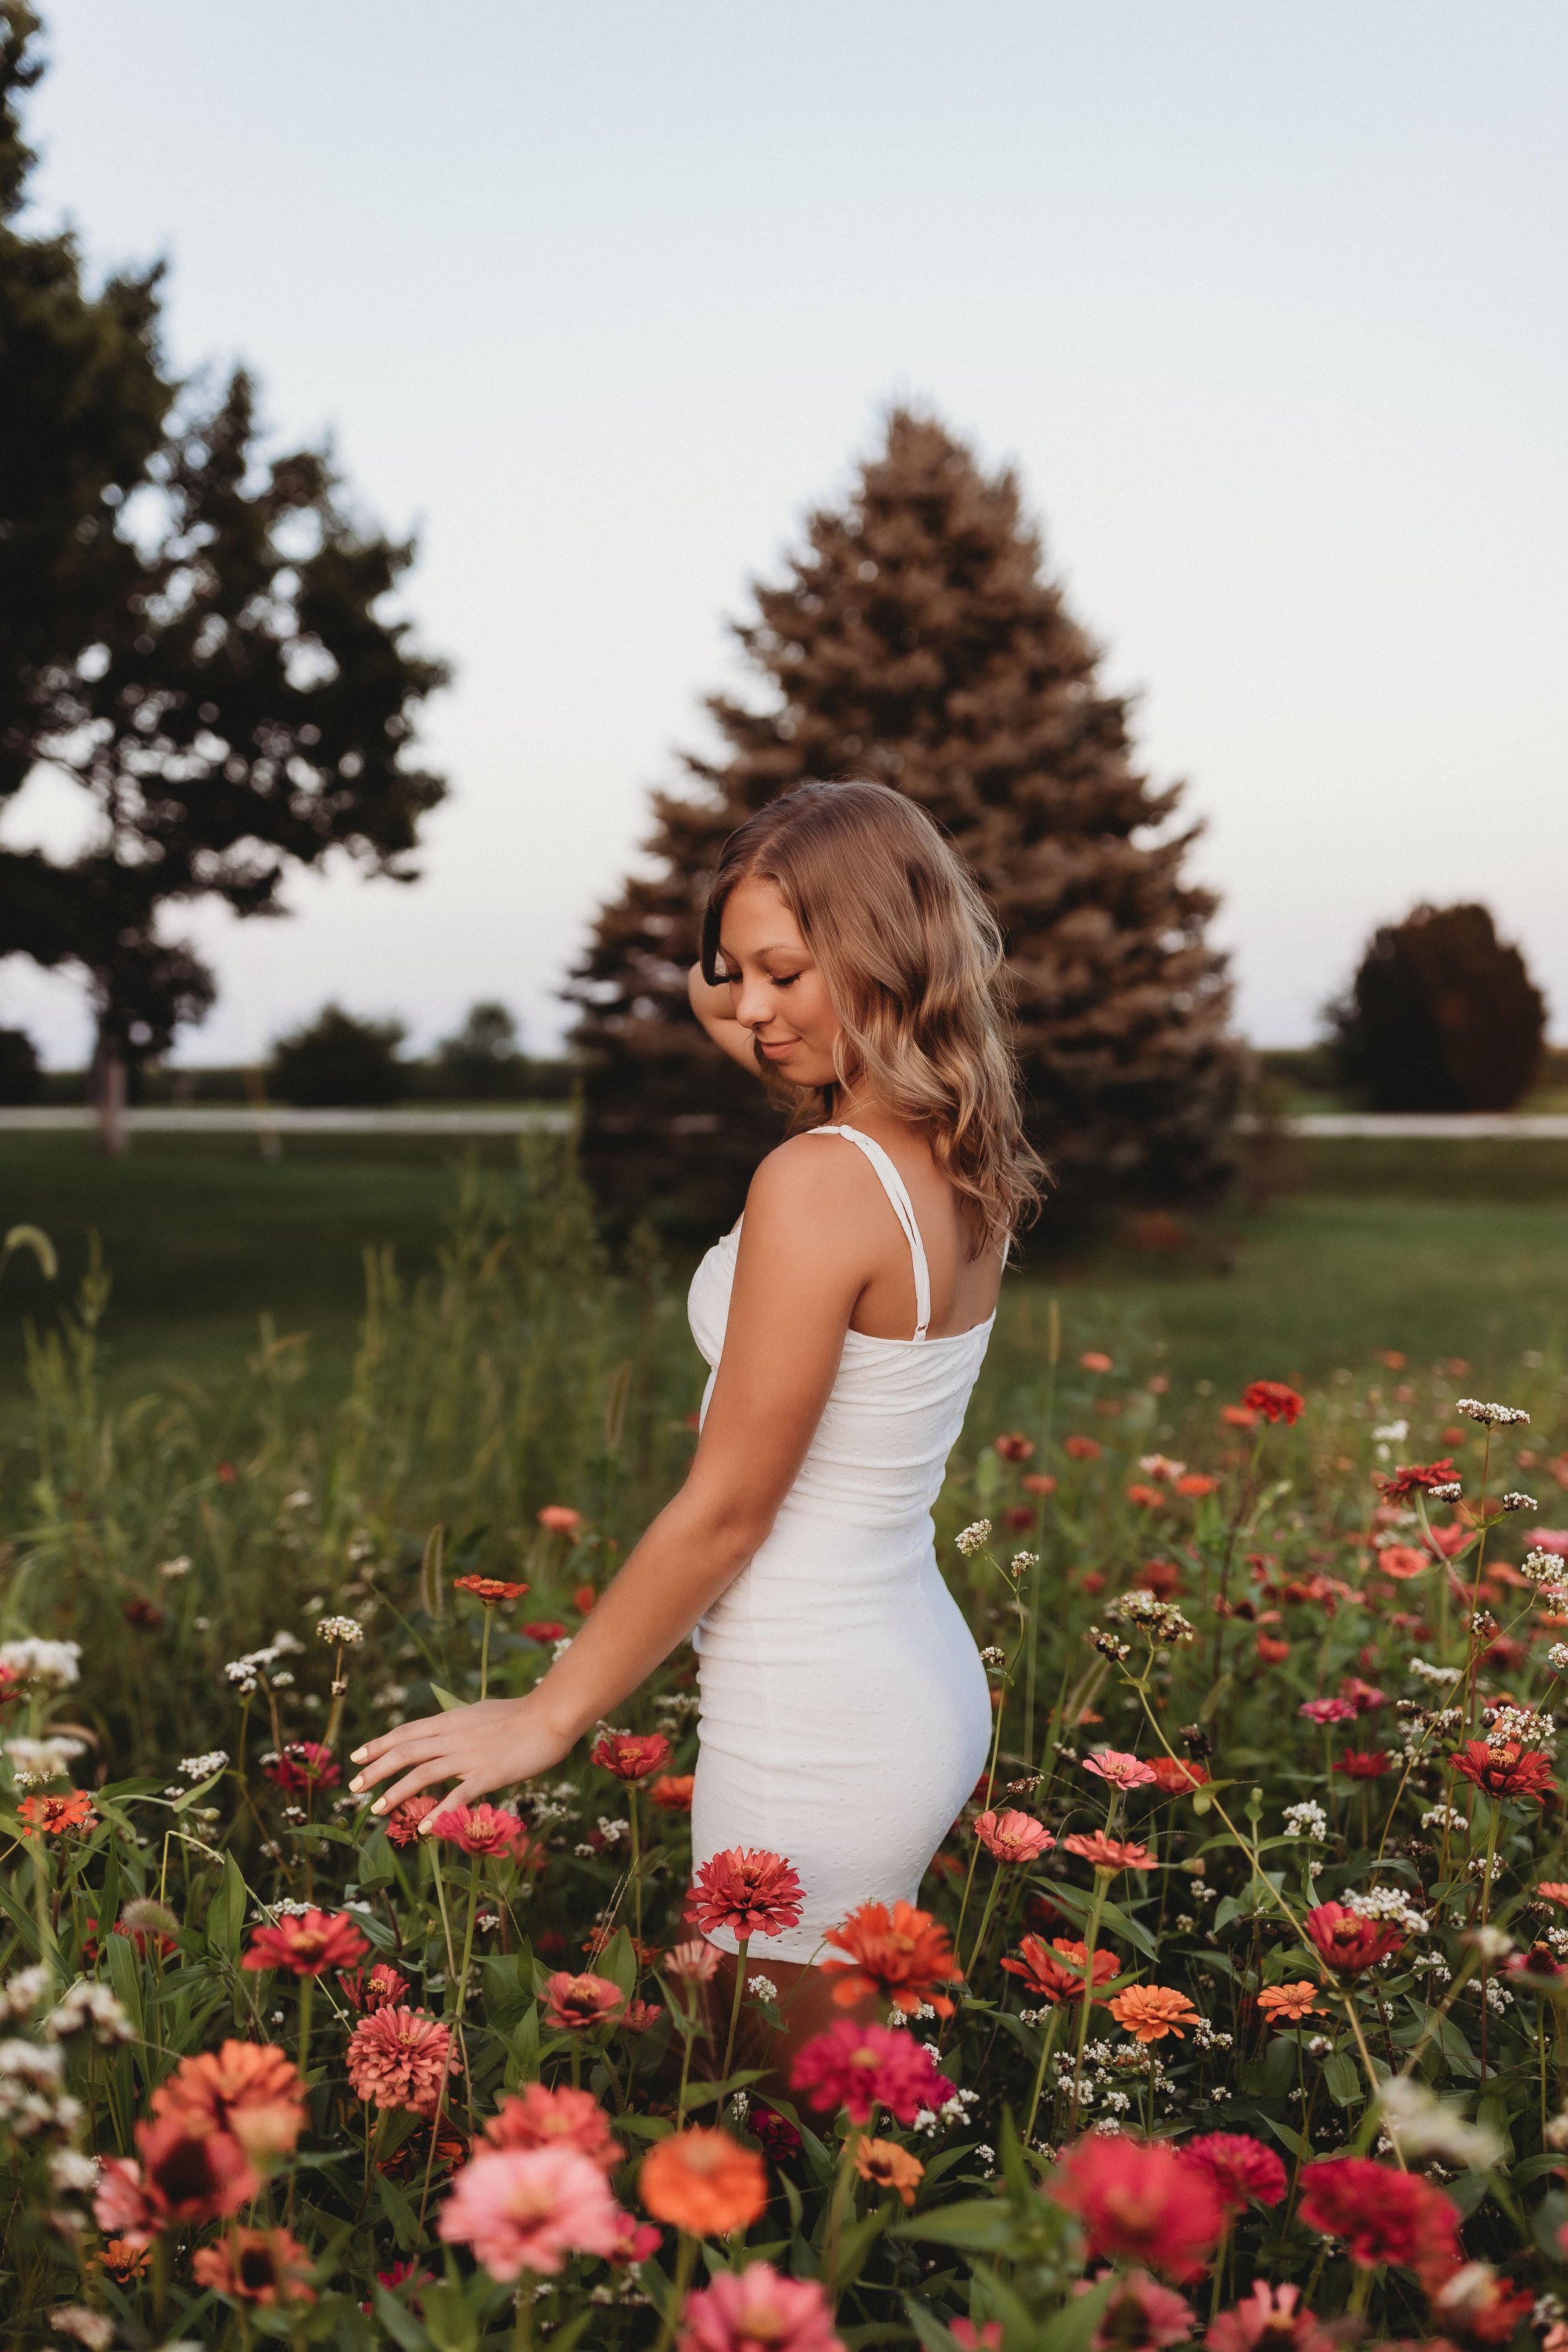  a young woman stands in a flower field wearing a white dress 